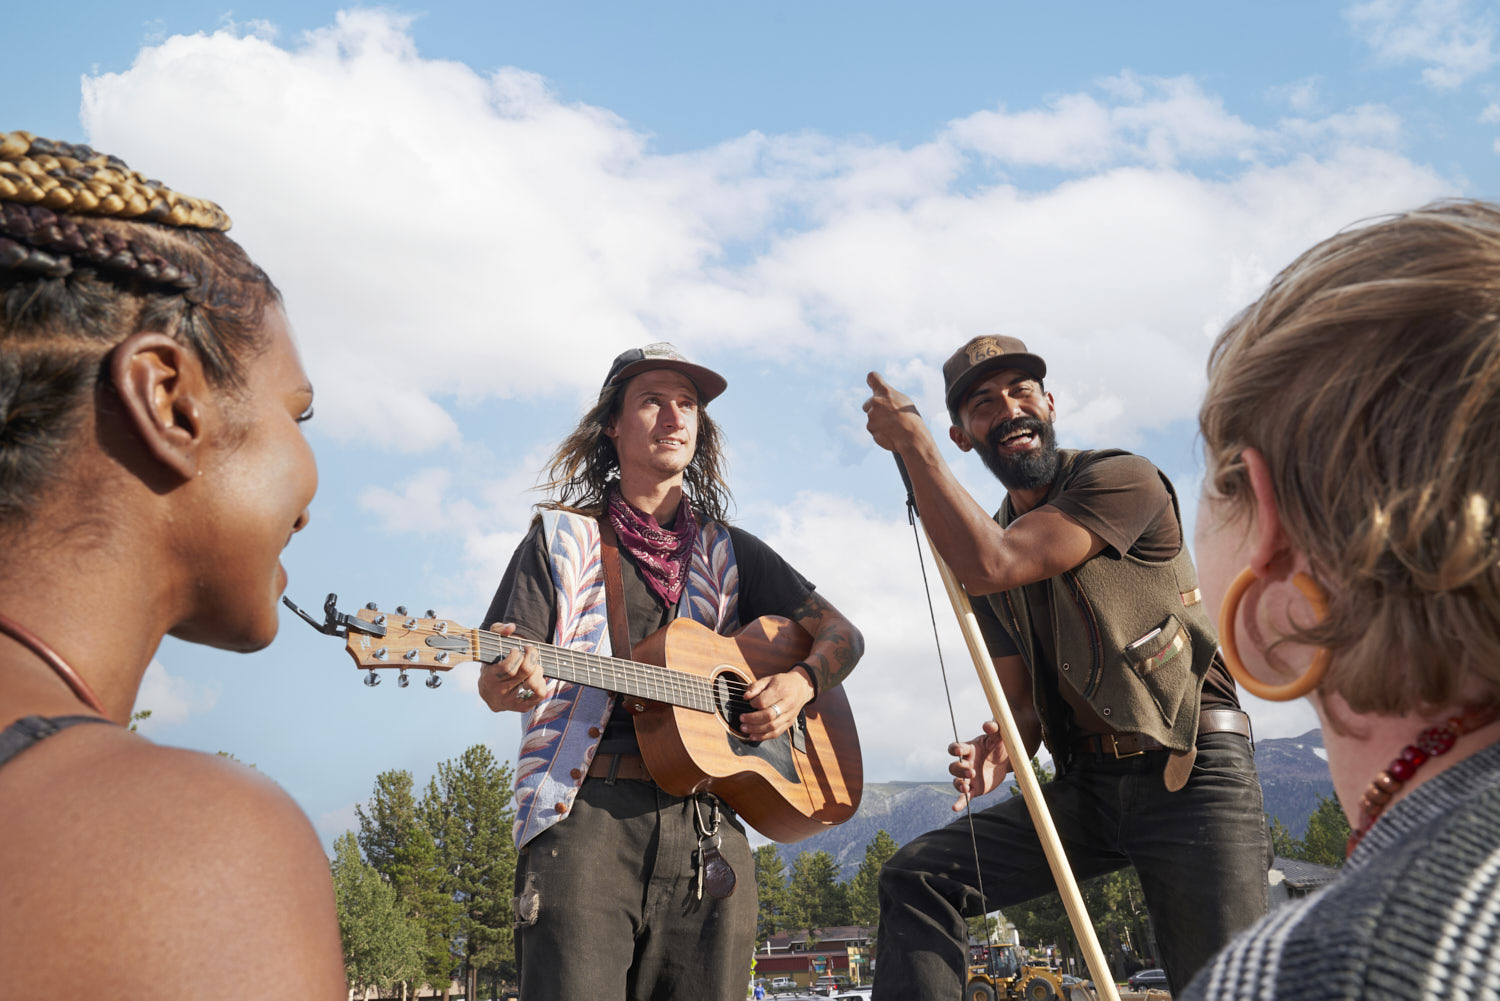 Musicians play instruments on a roadside stage, showcasing their talent to passersby.